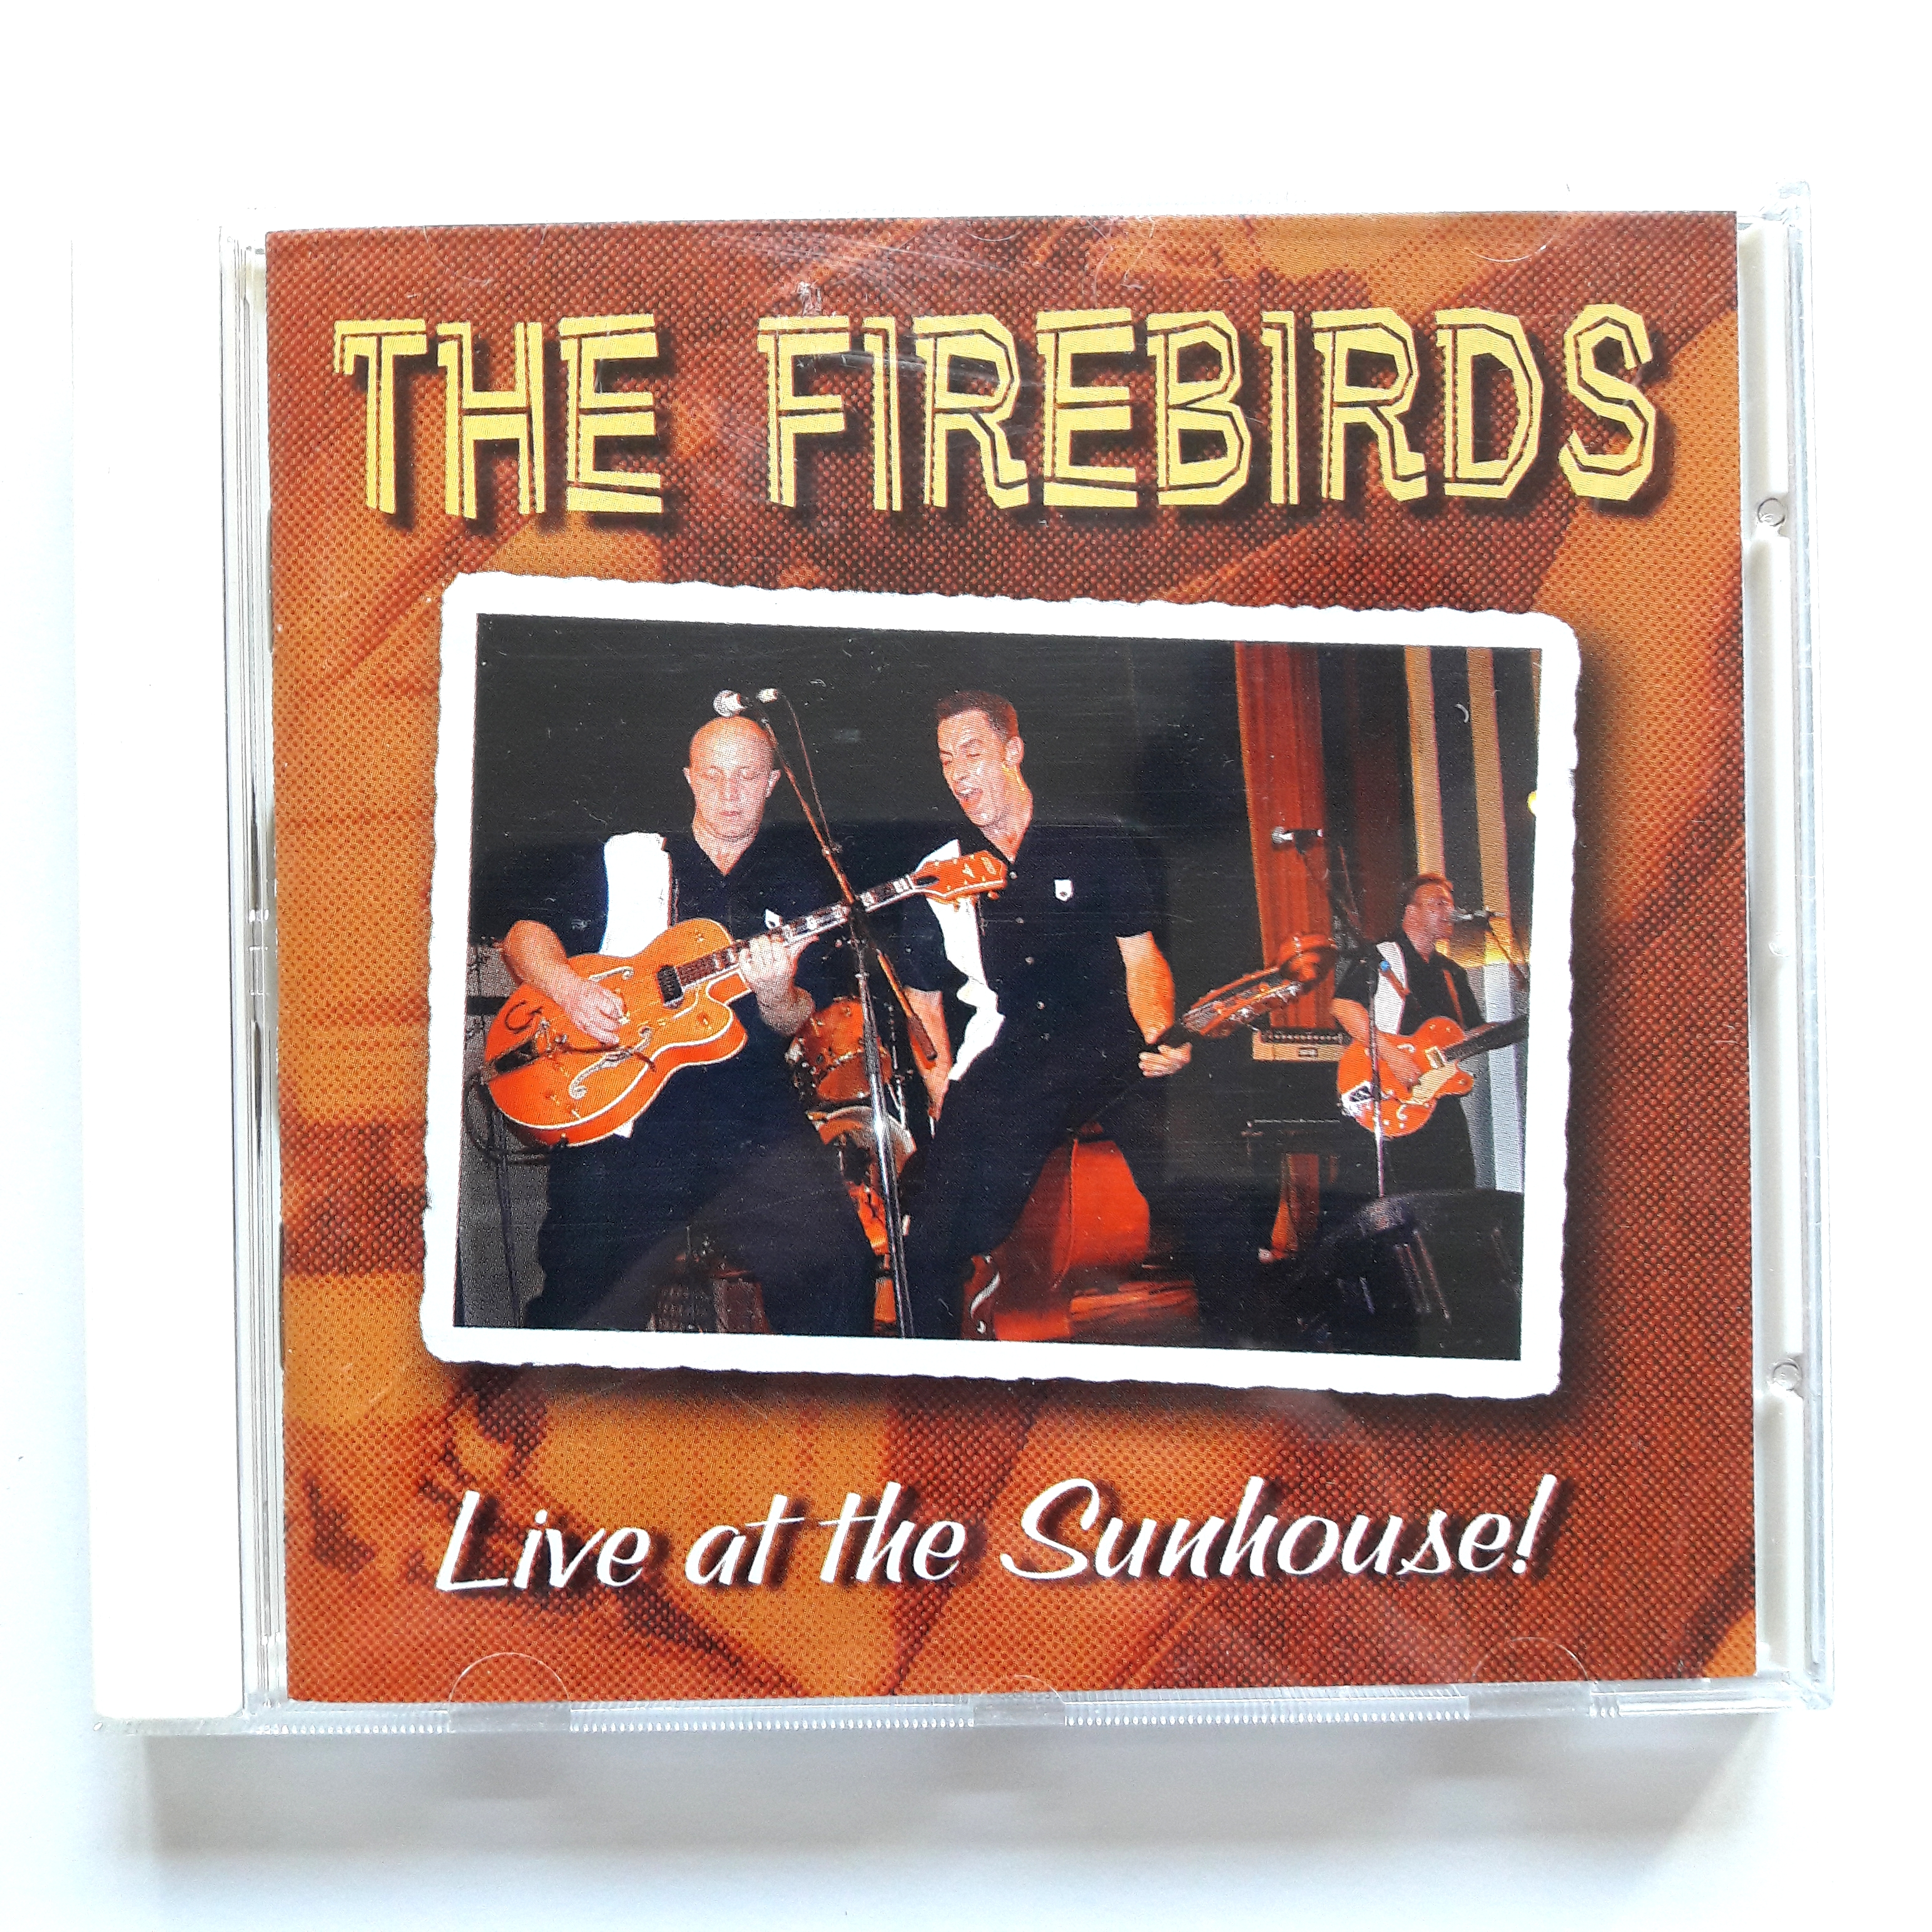 The Firebirds - Live at the Sunhouse!